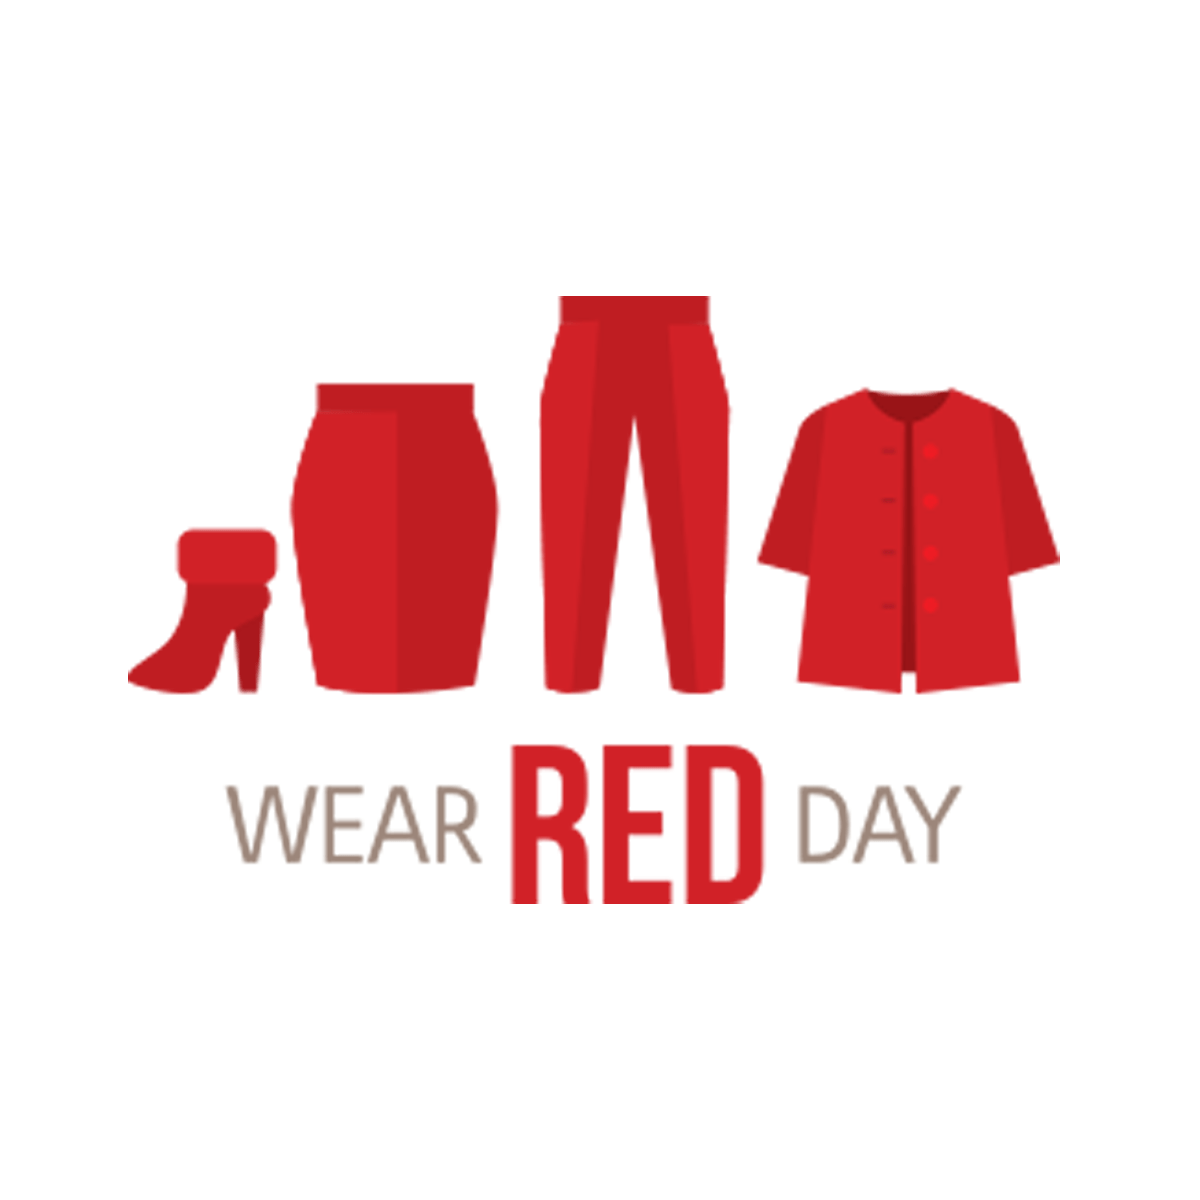 February 1 is National Wear Red Day